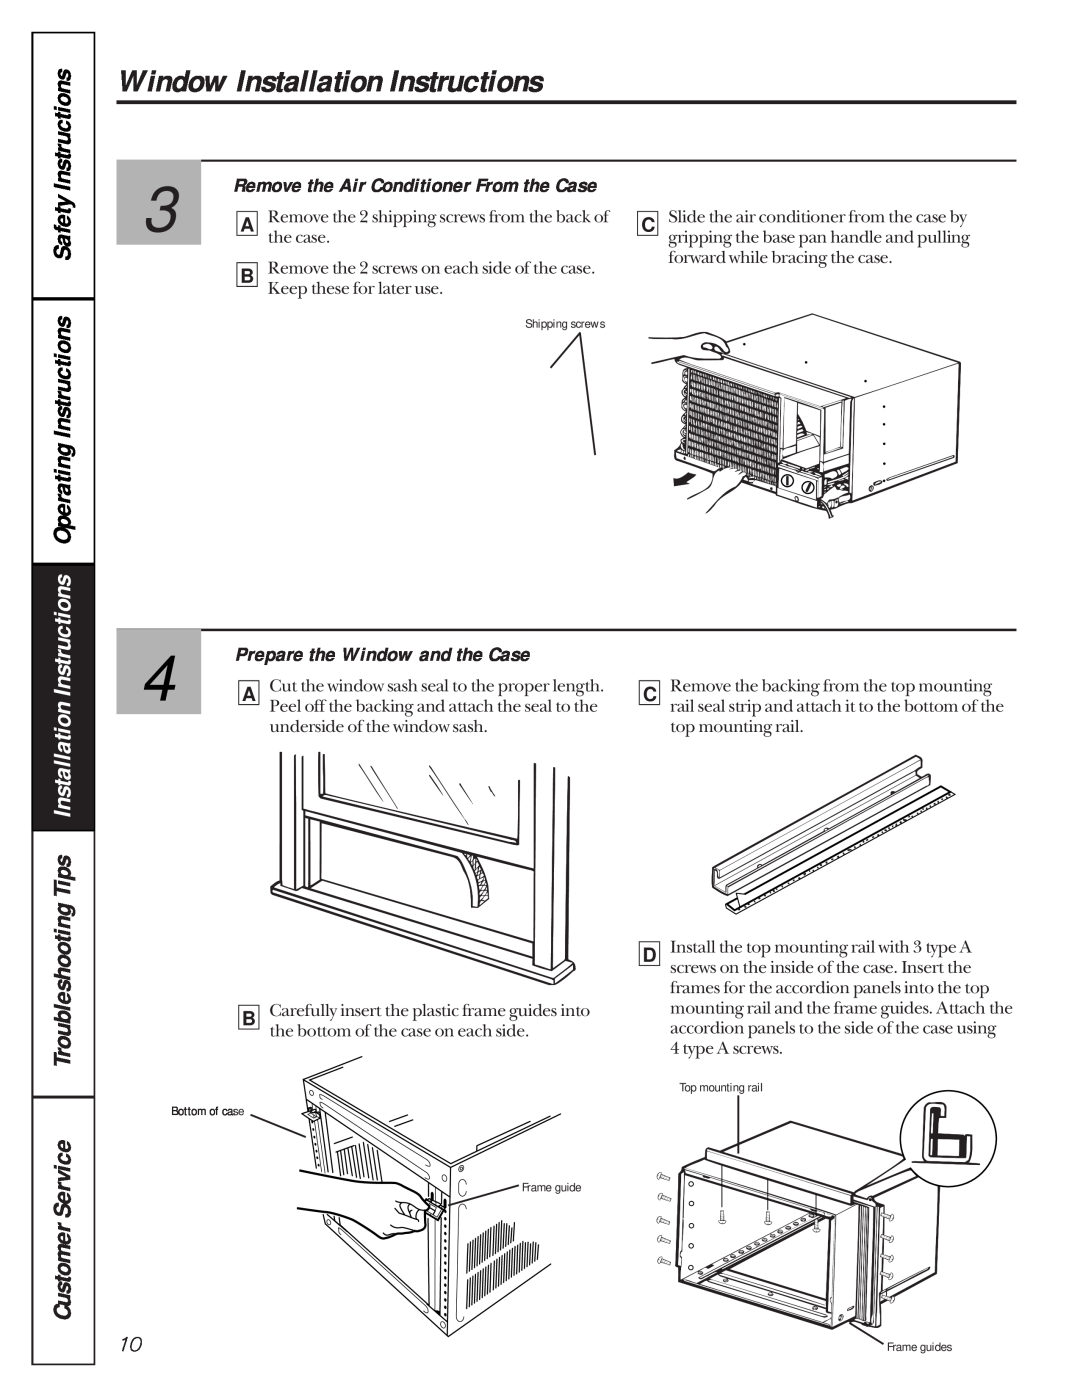 GE AGV08 TroubleshootingTips, Remove the Air Conditioner From the Case, Window Installation Instructions, CustomerService 